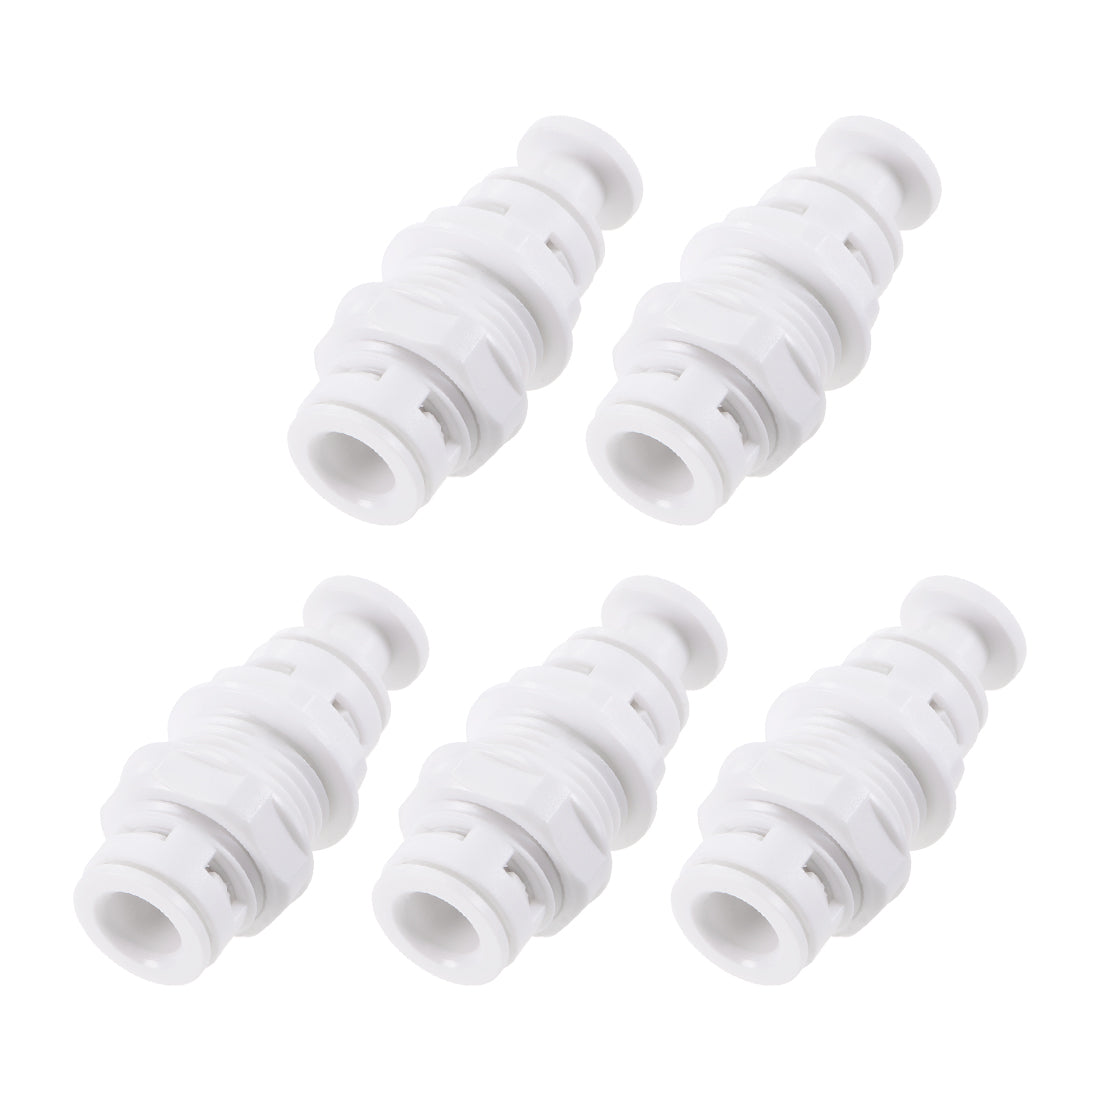 uxcell Uxcell Quick Union Bulkhead Connector 3/8" to 3/8", Straight Connect Fittings for RO Water Purifier, 45mm White 5Pcs